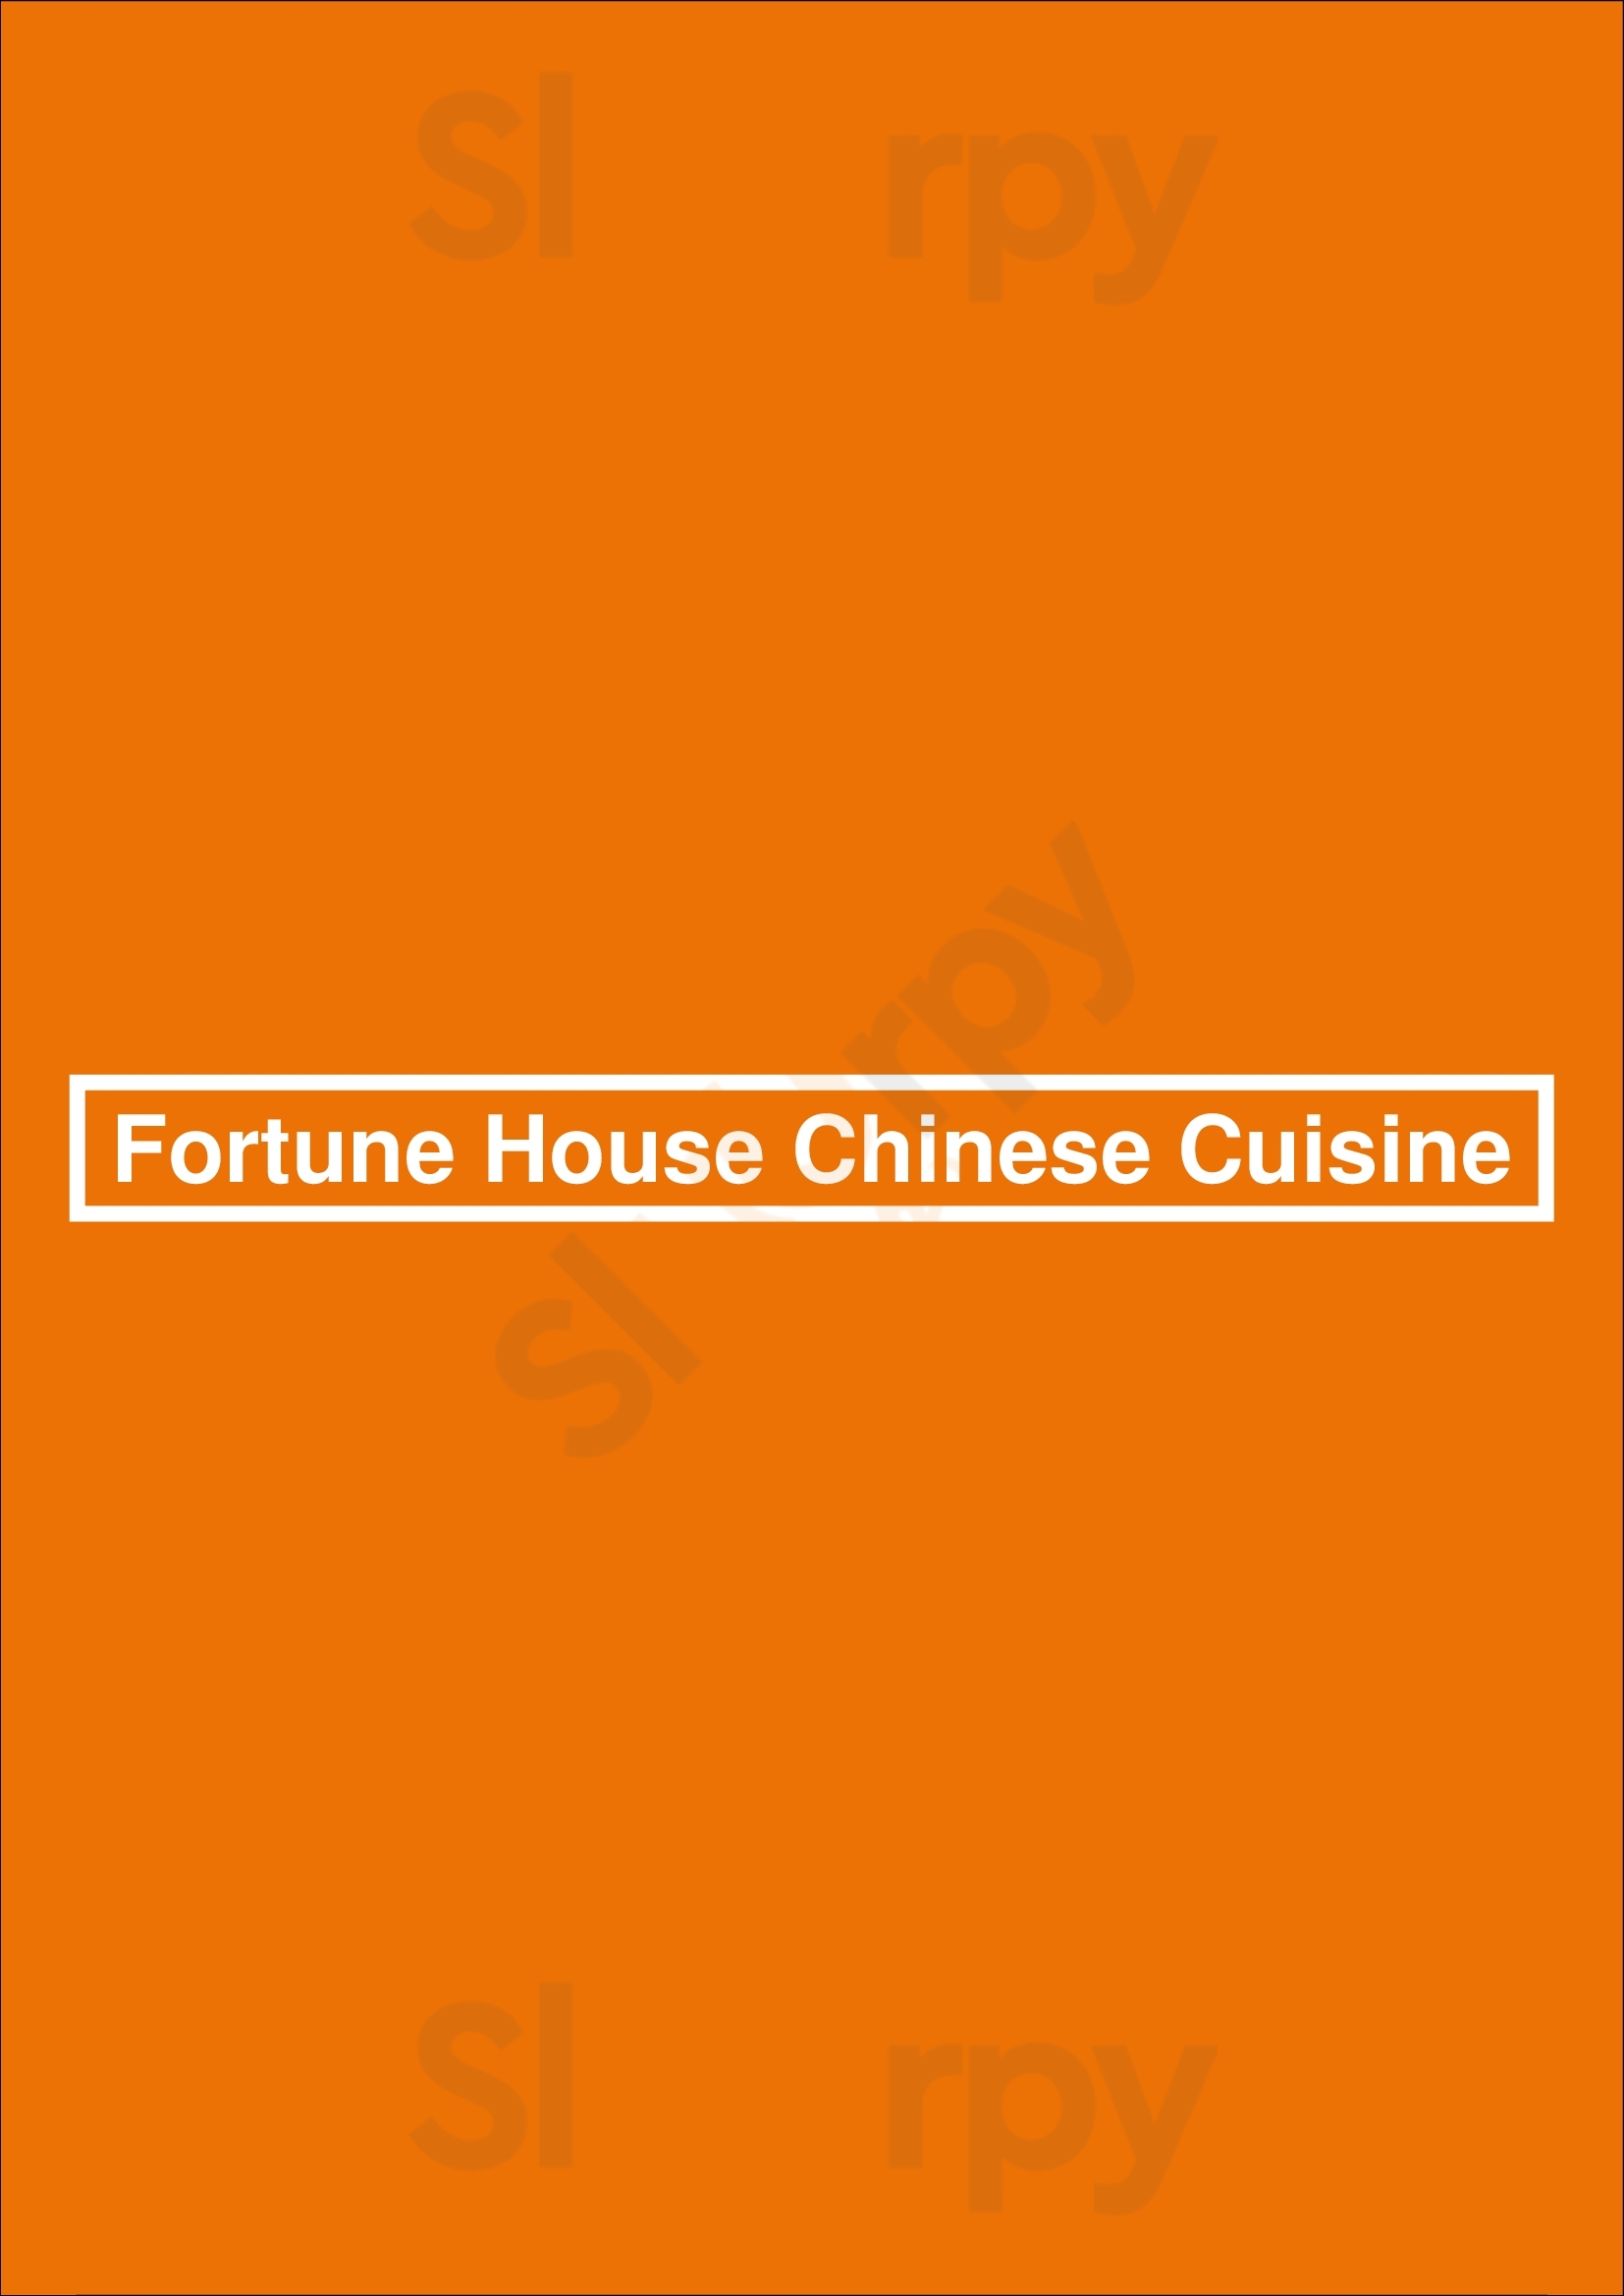 Fortune House Chinese Cuisine Los Angeles Menu - 1